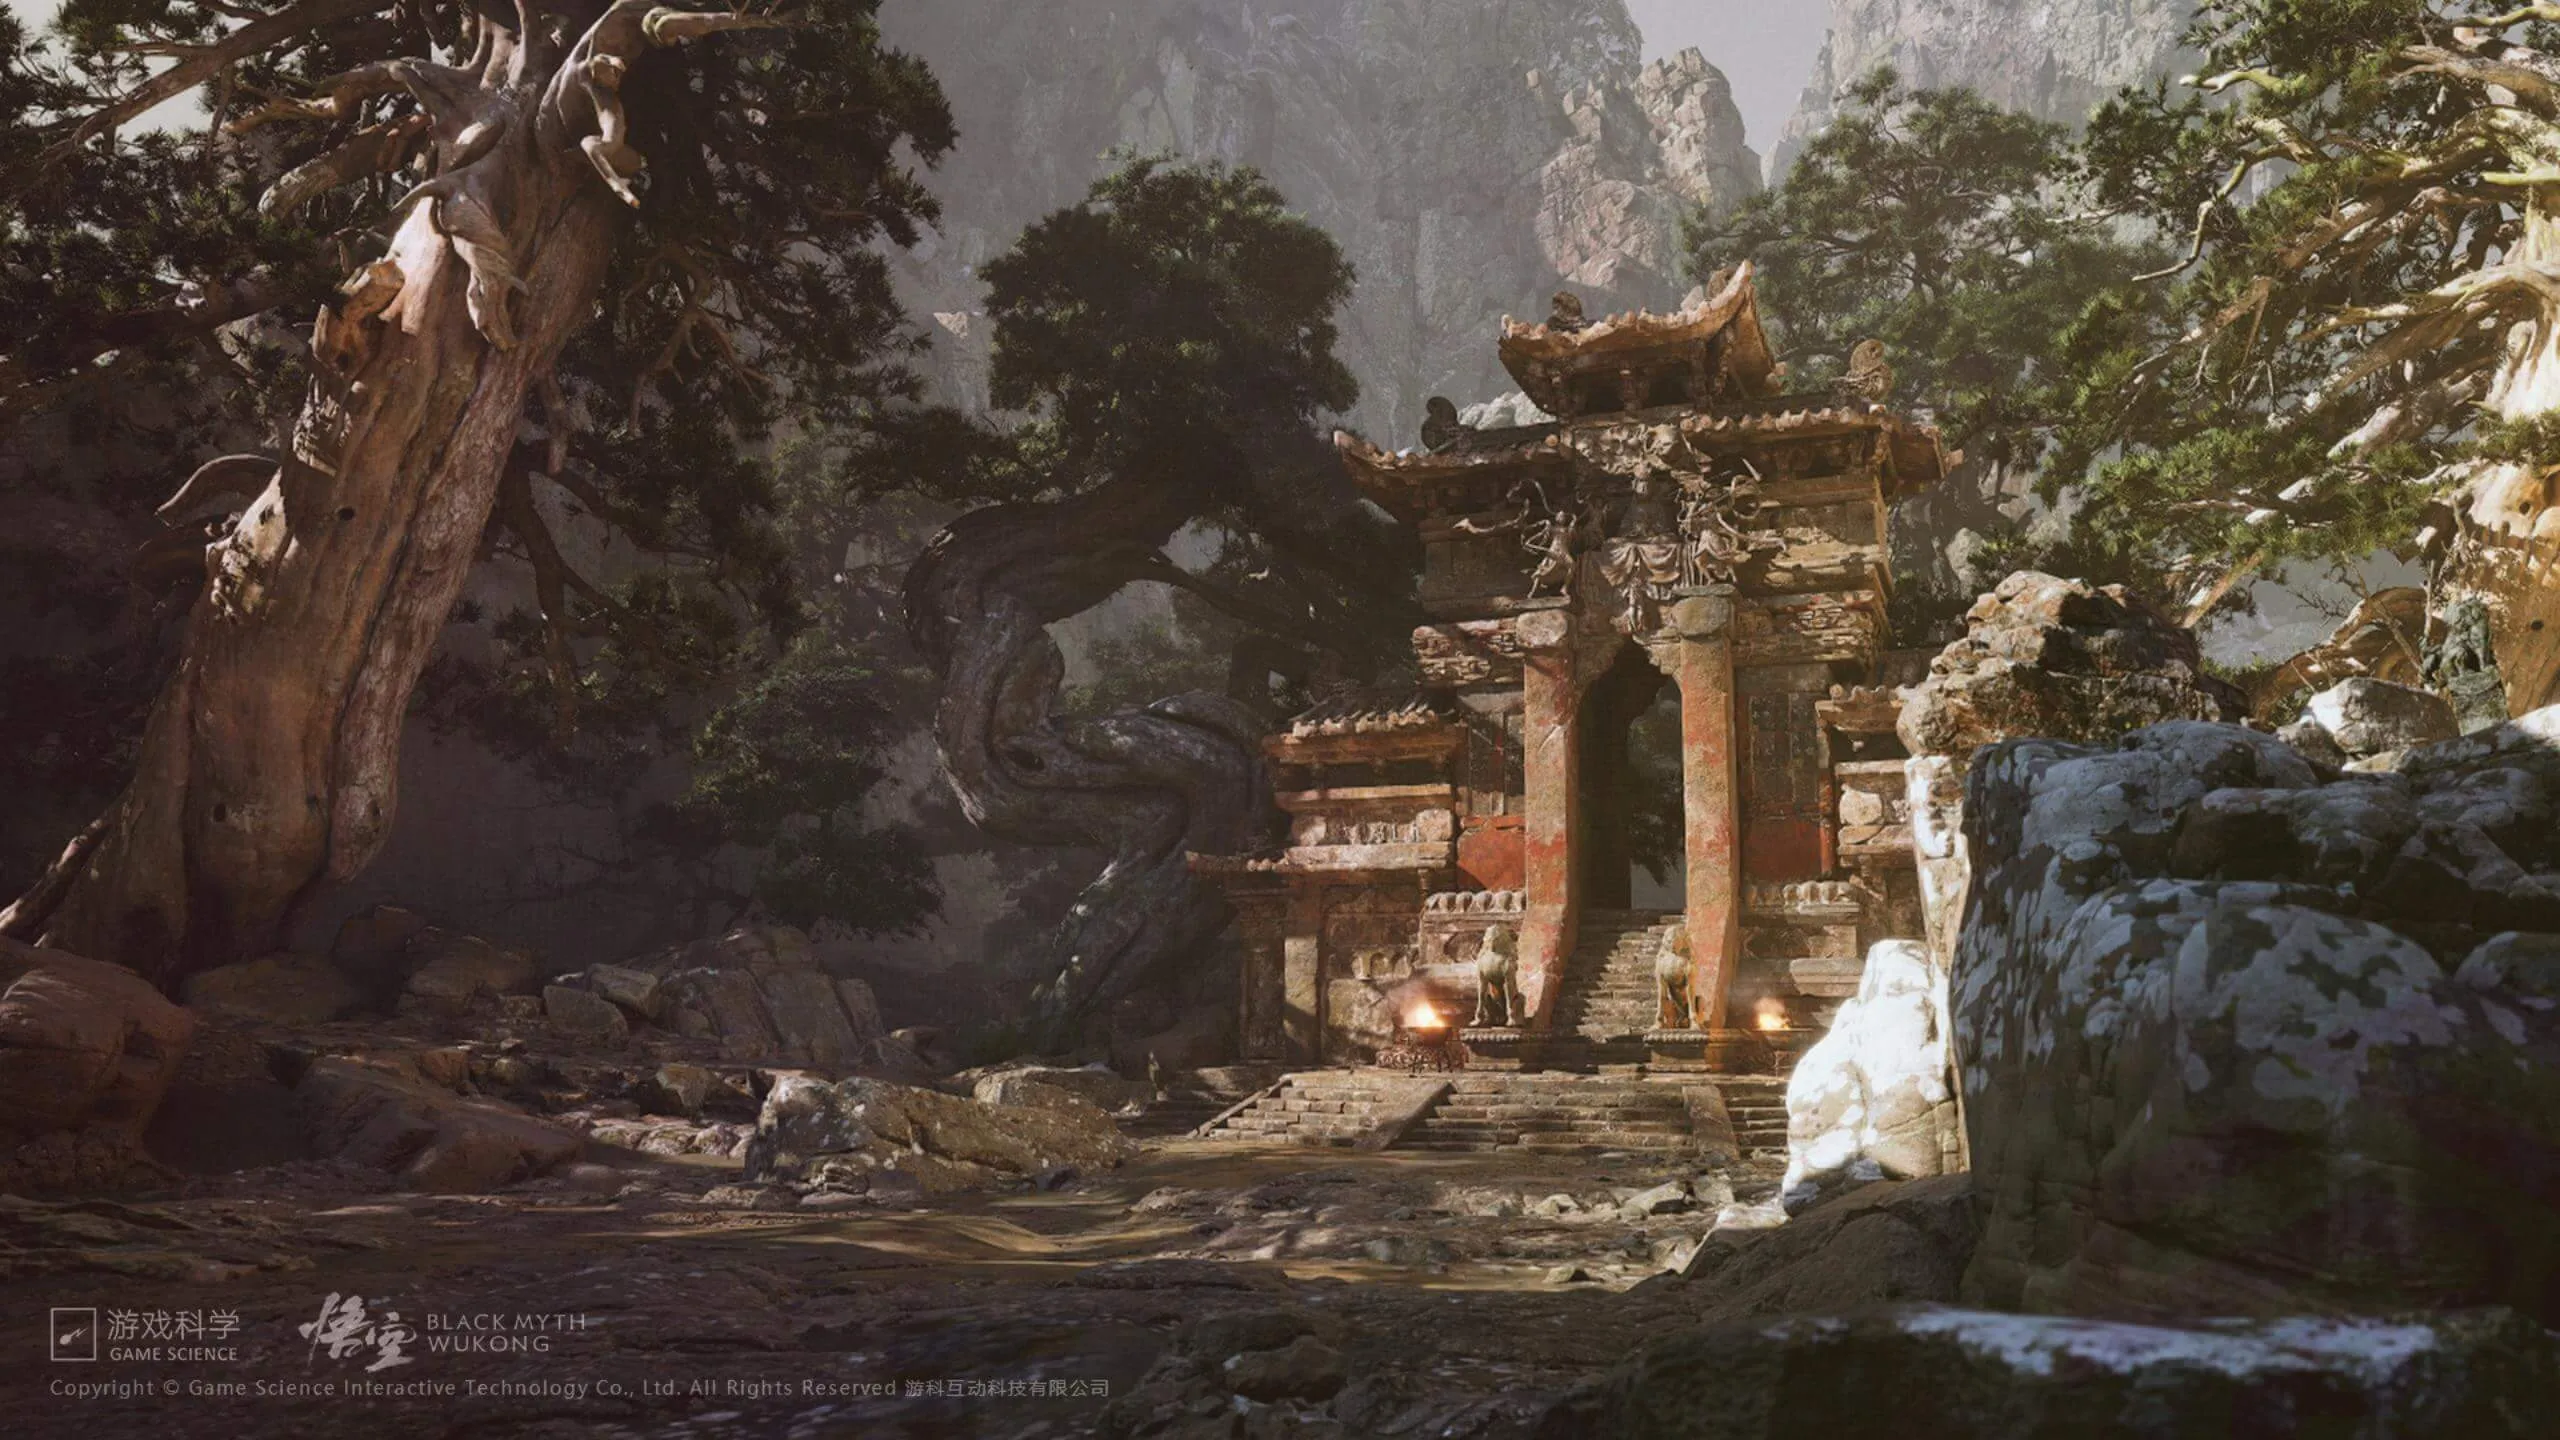 Chinese pagoda in the mountains on the screenshot of the game